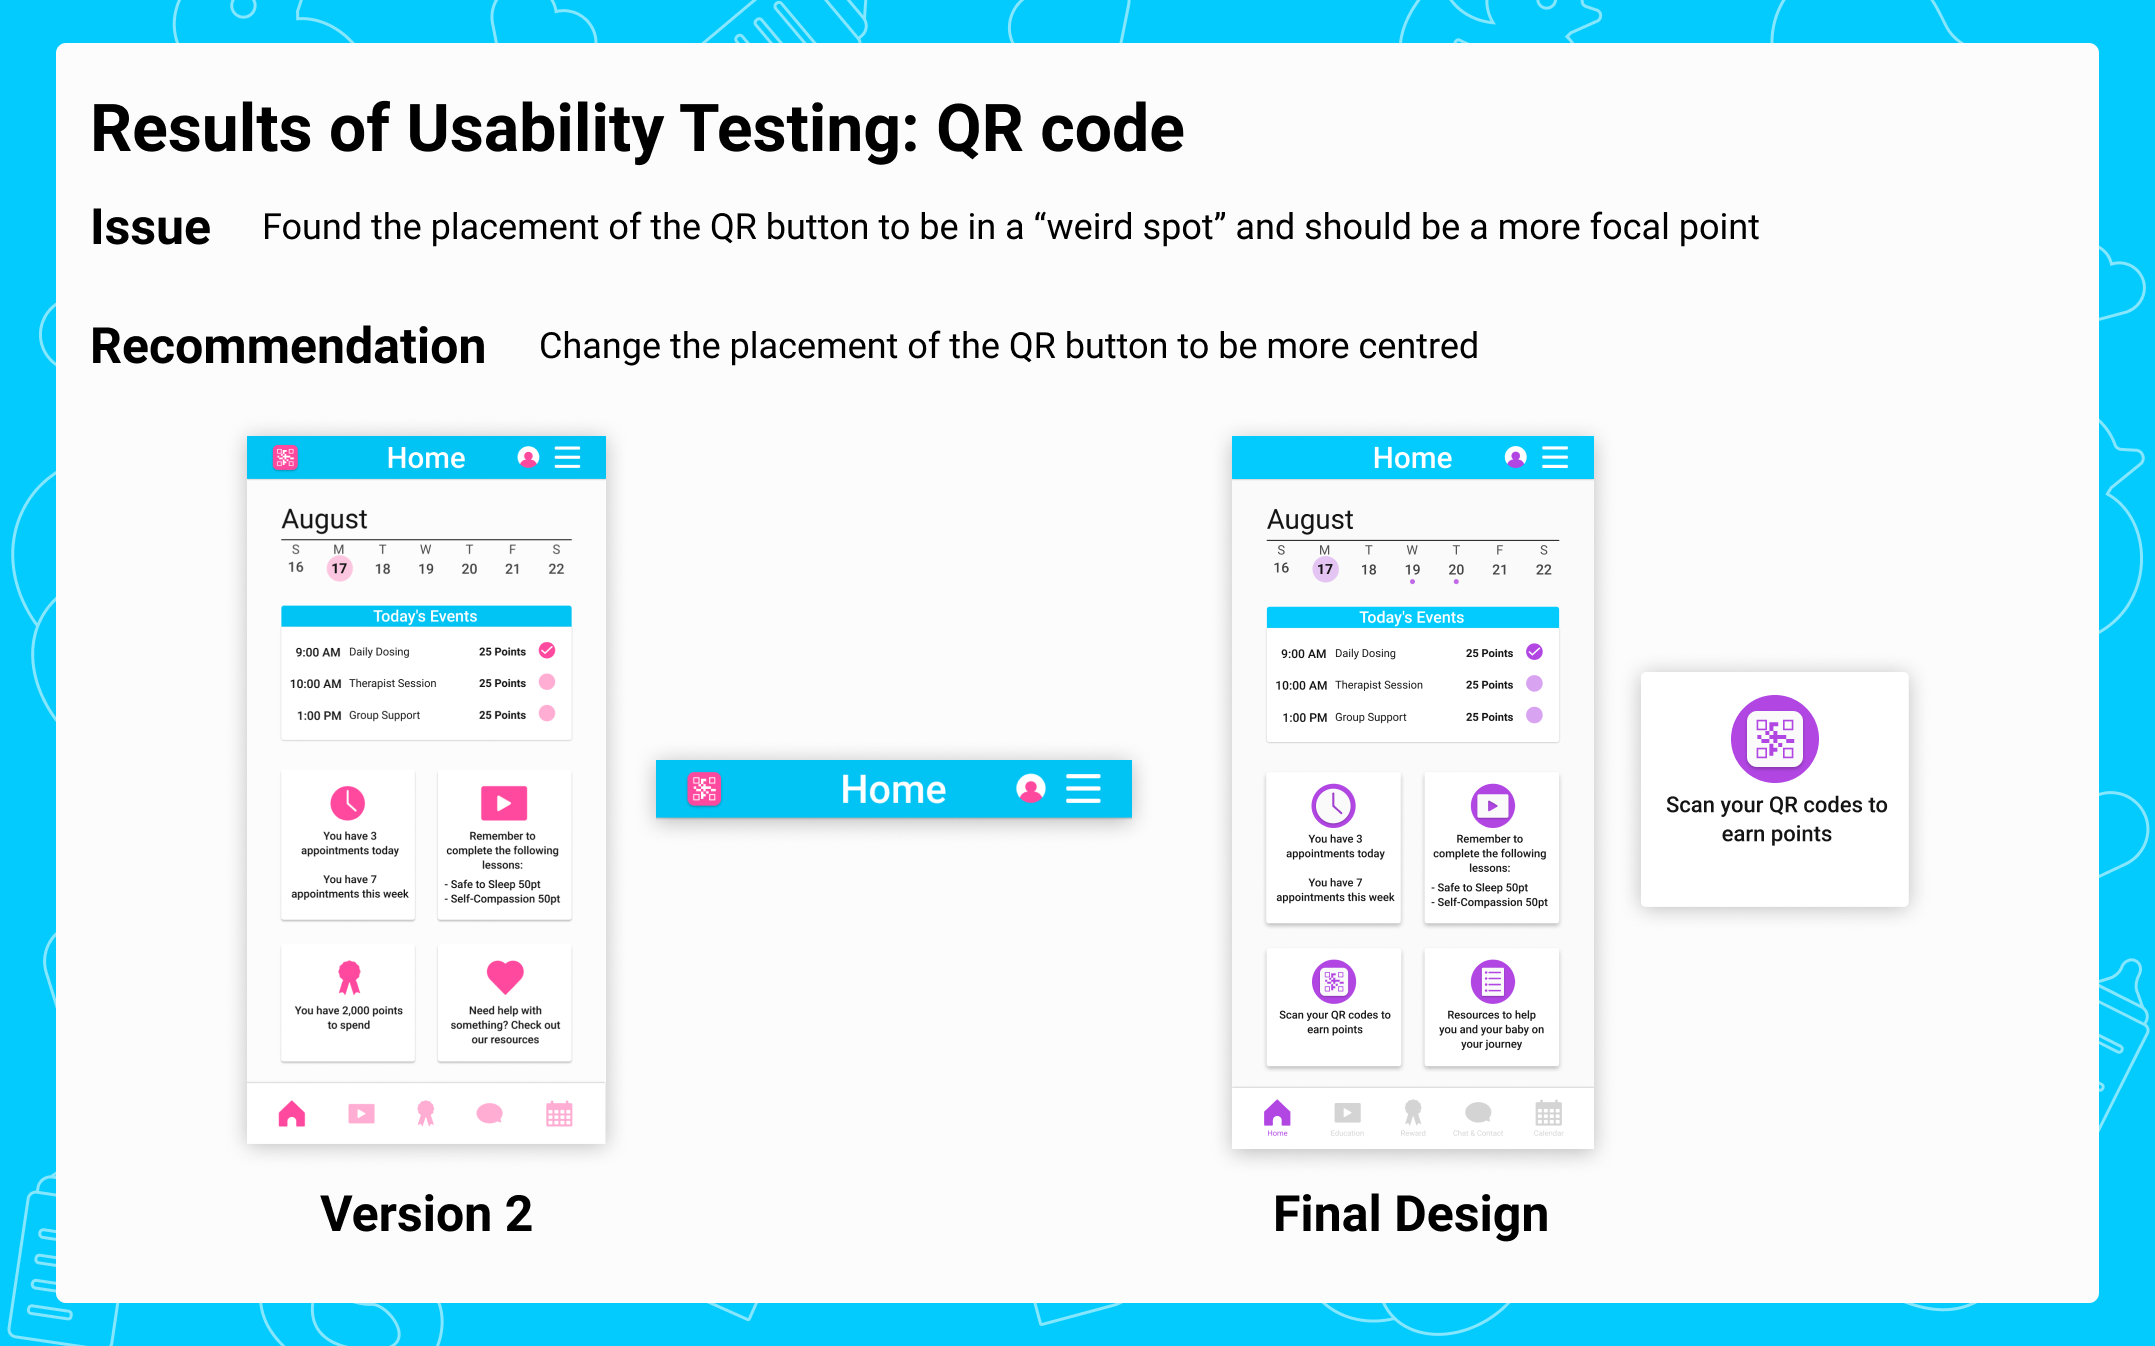 Image of a usability testing results for Safe4Both